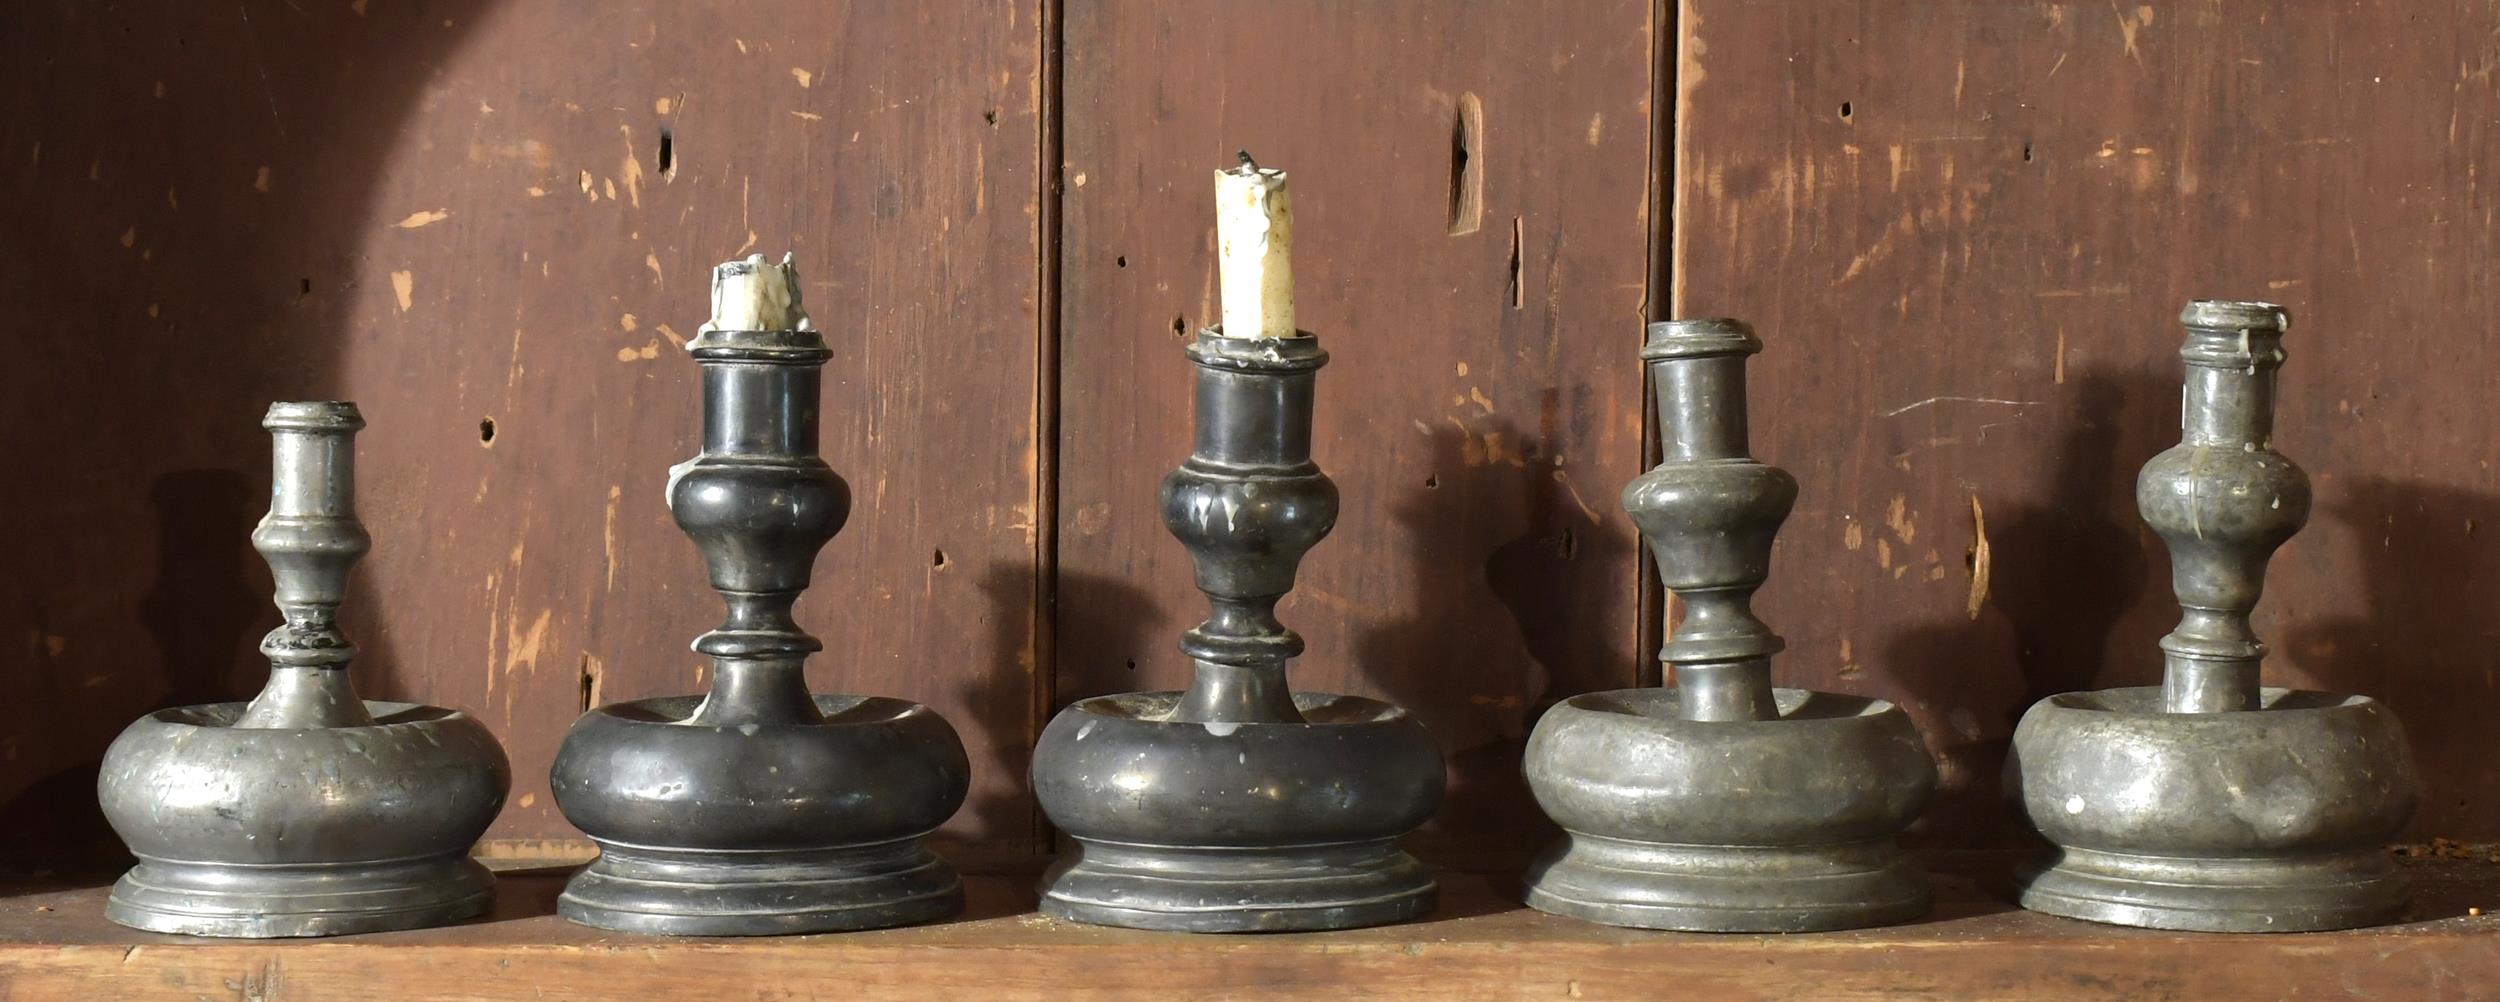 FIVE 17TH C. PEWTER CANDLESTICKS.